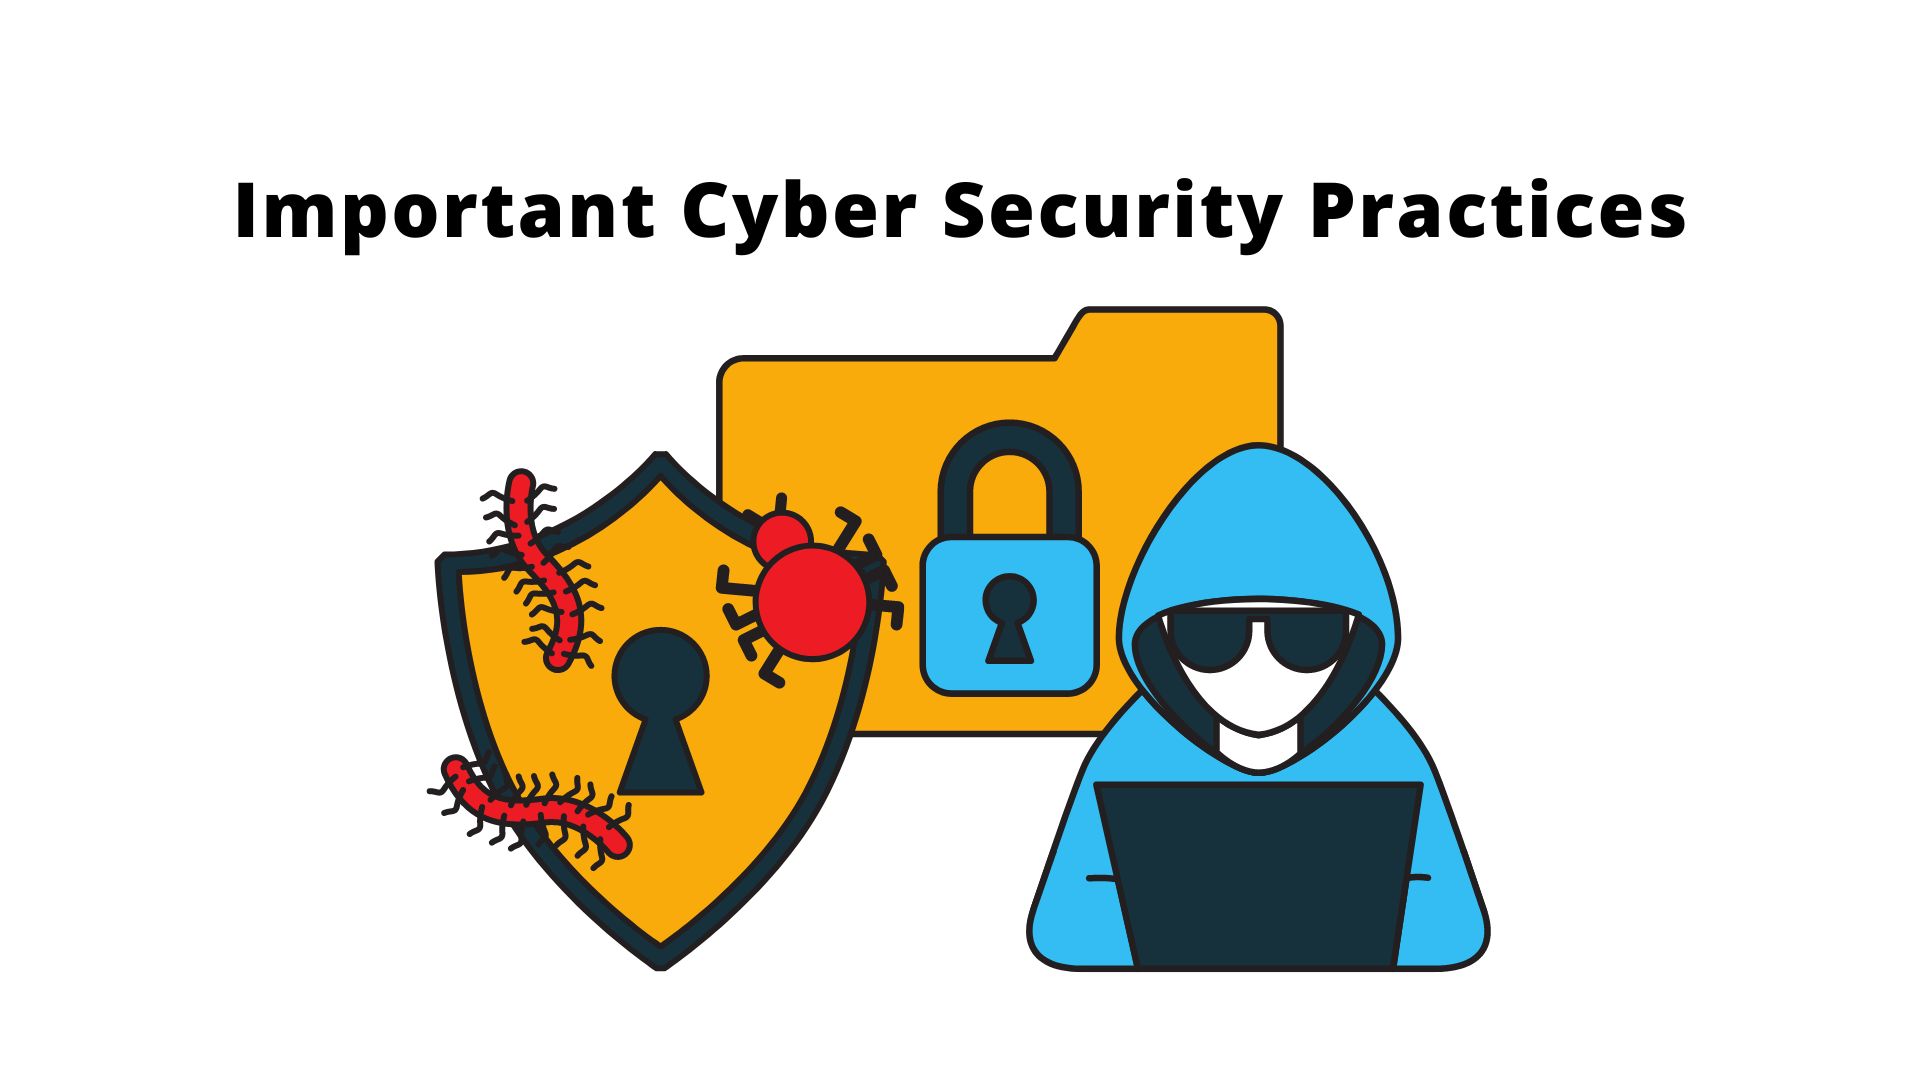 8 Important Cyber Security Practices For Small To Medium-Size Business